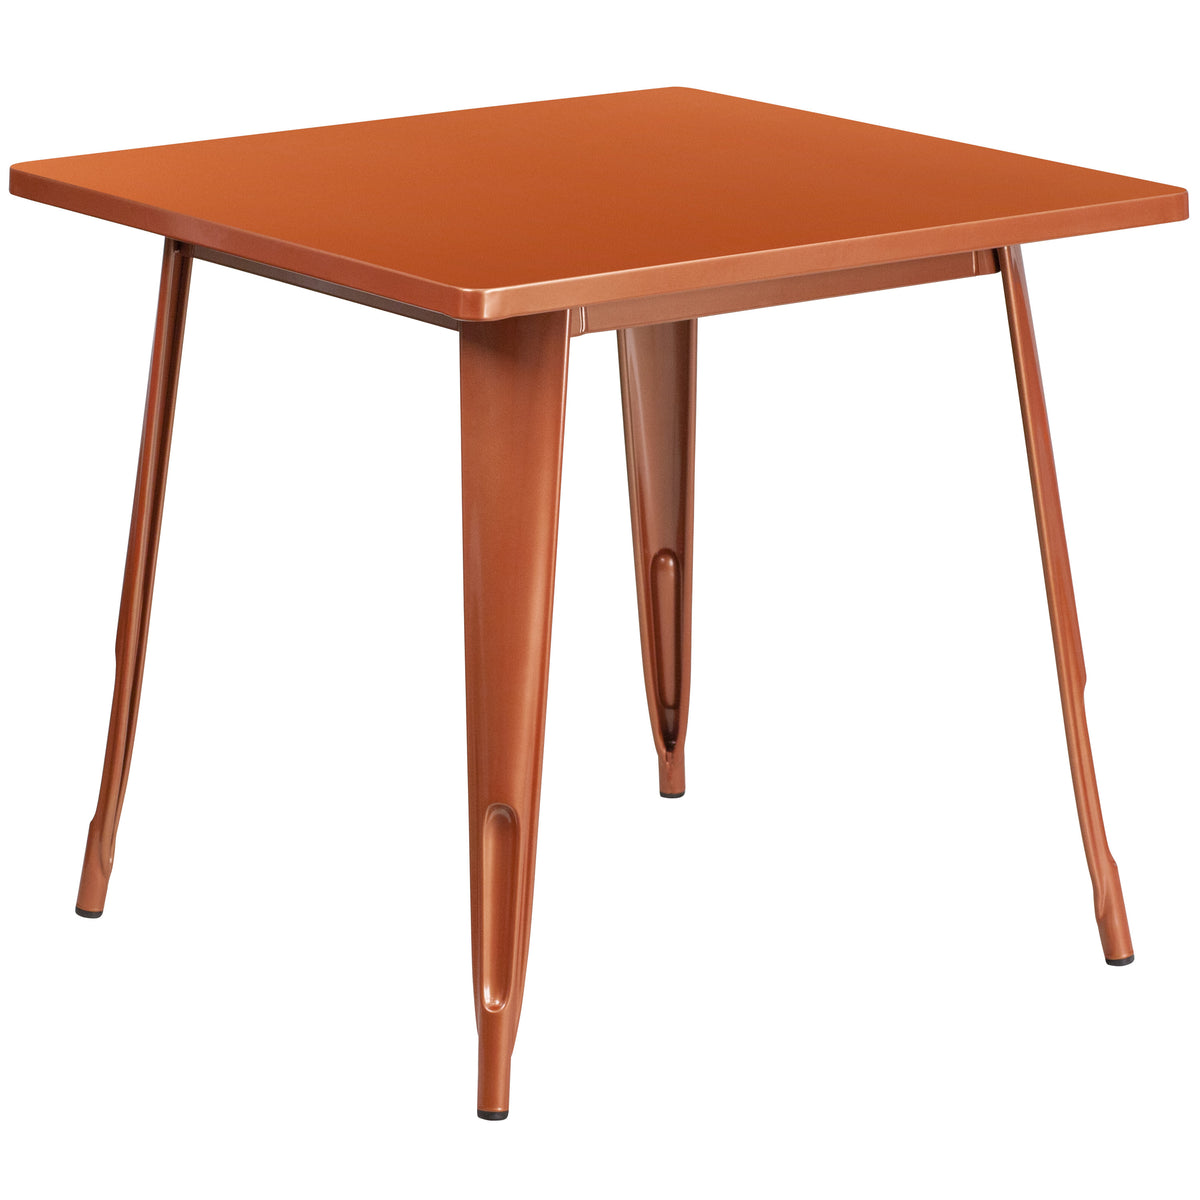 Copper |#| 31.5inch Square Copper Metal Indoor-Outdoor Table - Hospitality Furniture